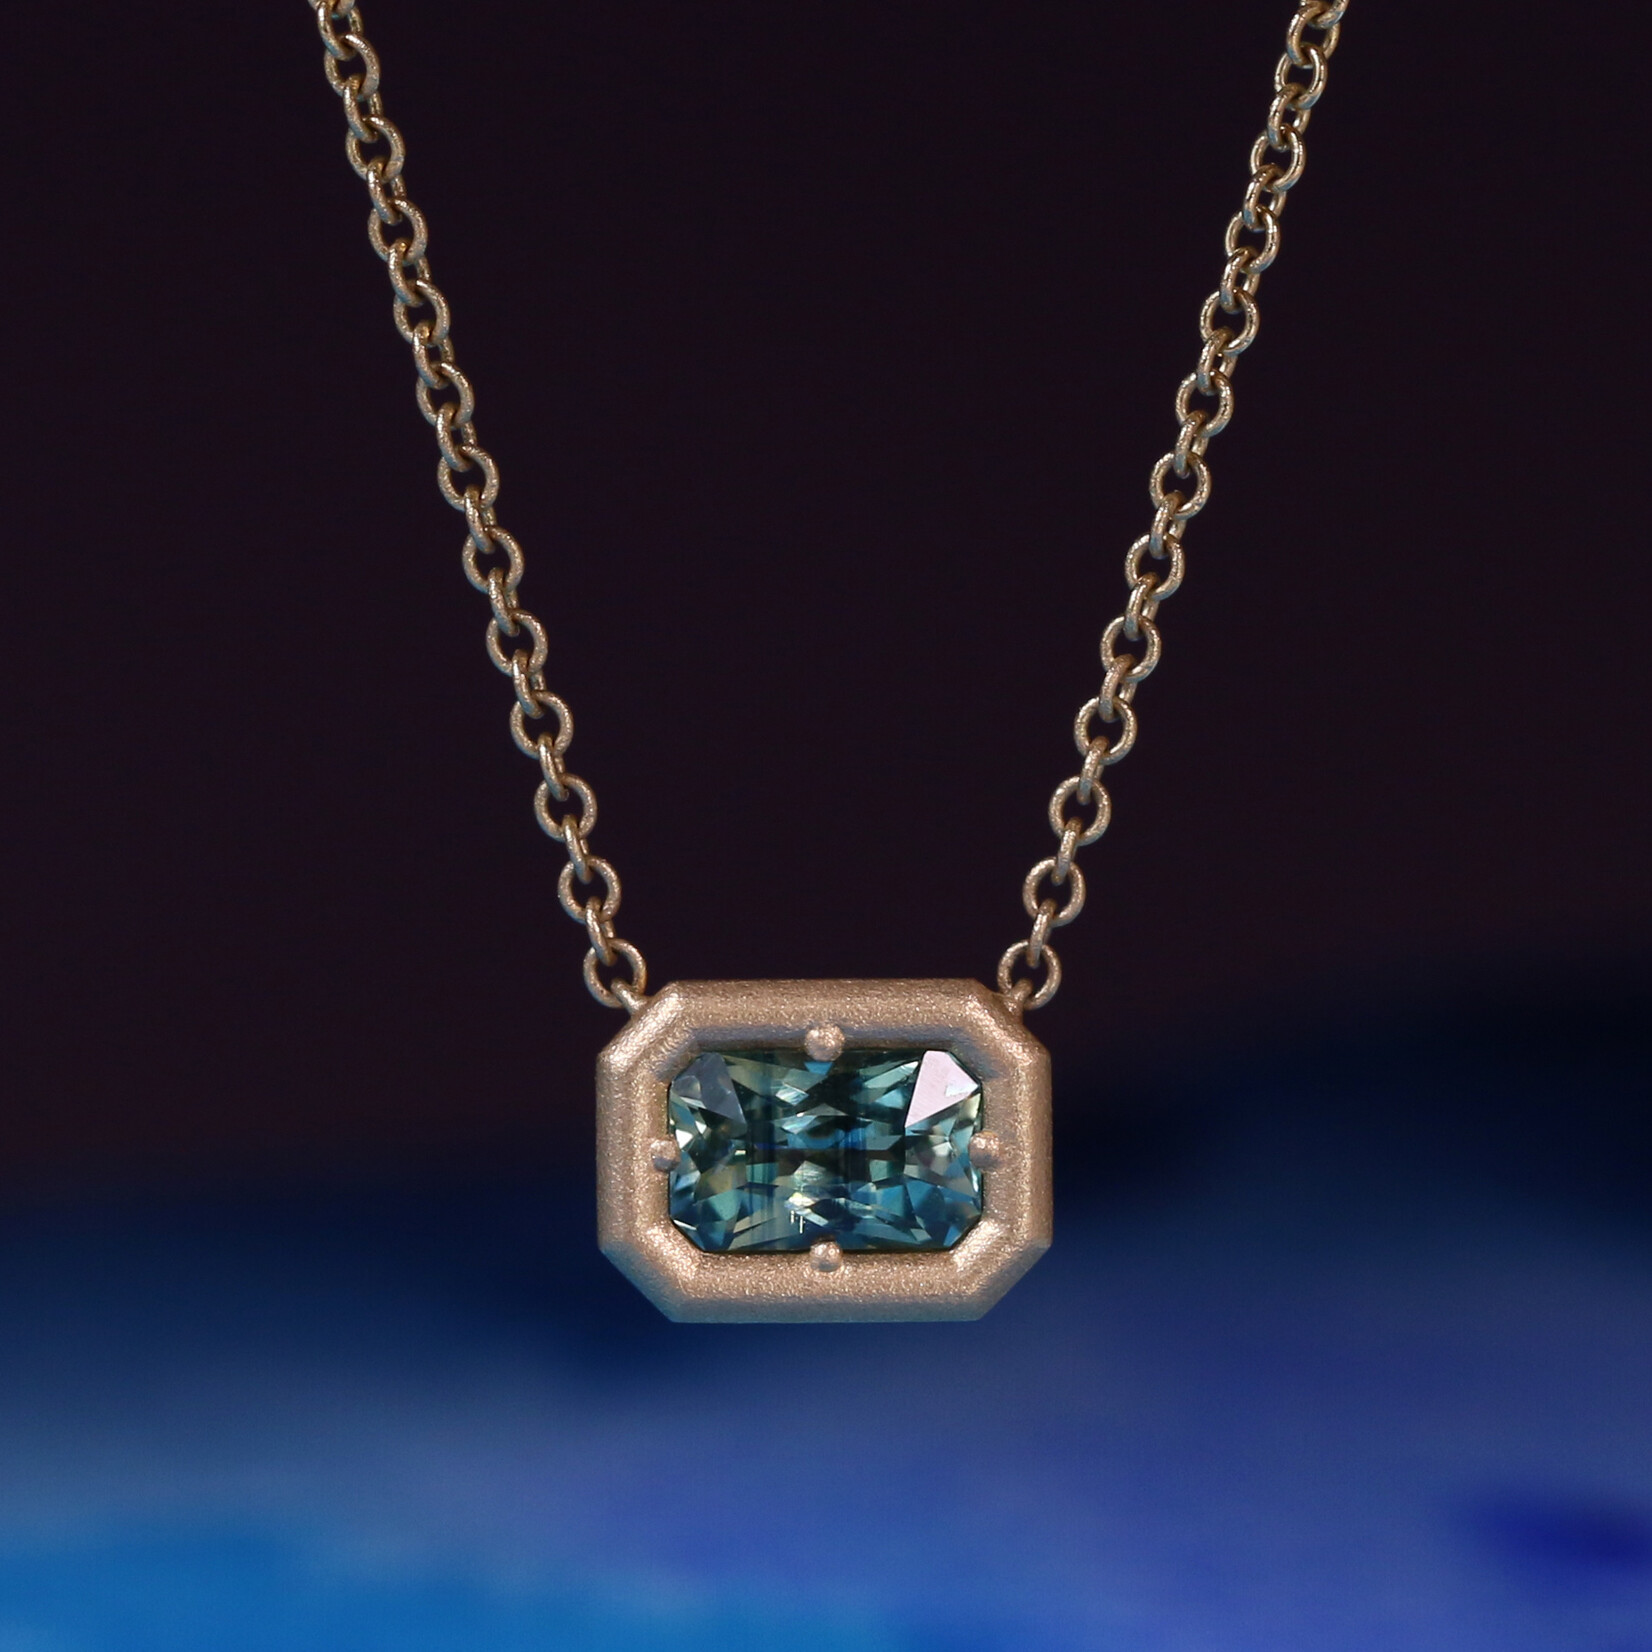 Baxter Moerman Anika Necklace with Teal Sapphire